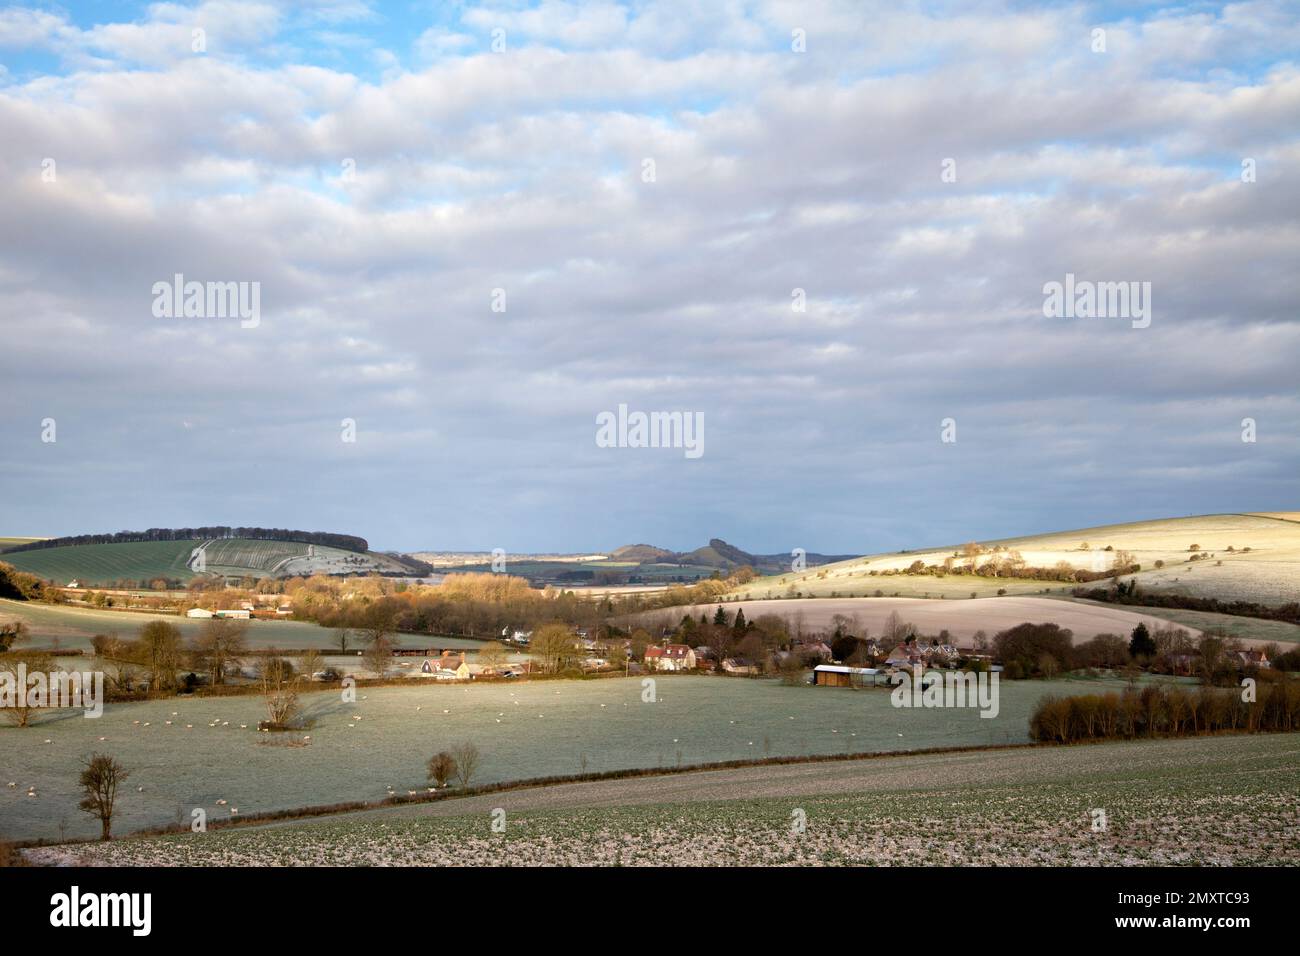 A view of the village of Monkton Deverill and the surrounding Wiltshire landscape near Warminster. Stock Photo